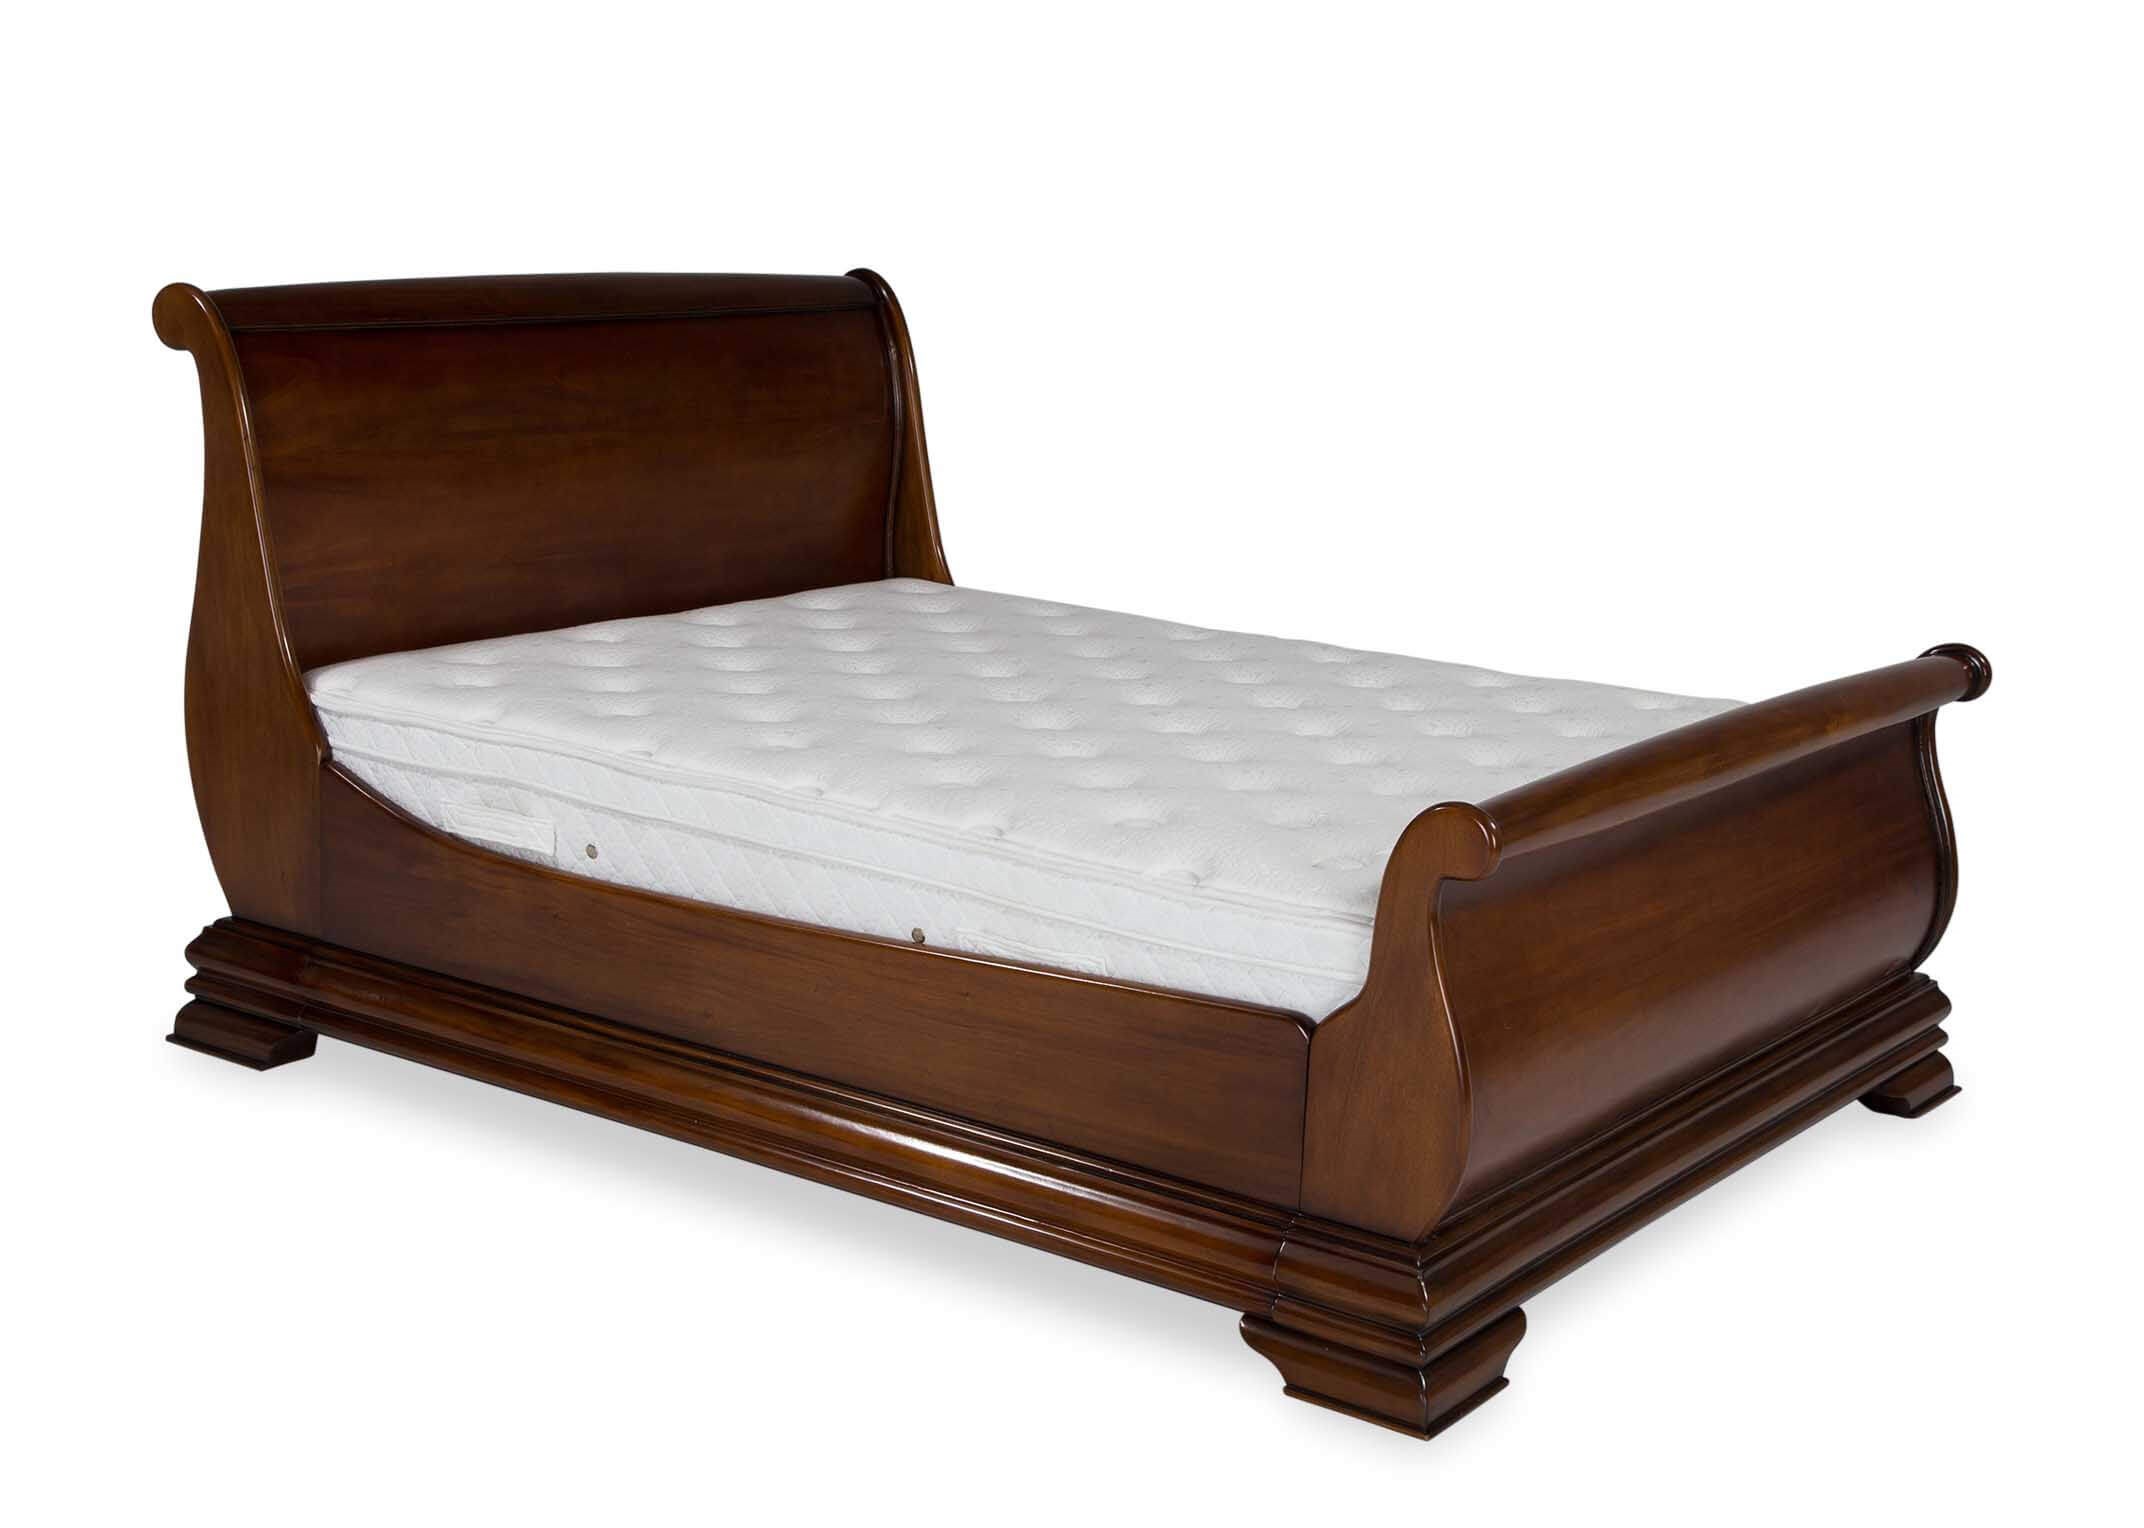 King Size 5 Ft Mahogany Bed Frame, King Size Bed Frame Sleigh Bed